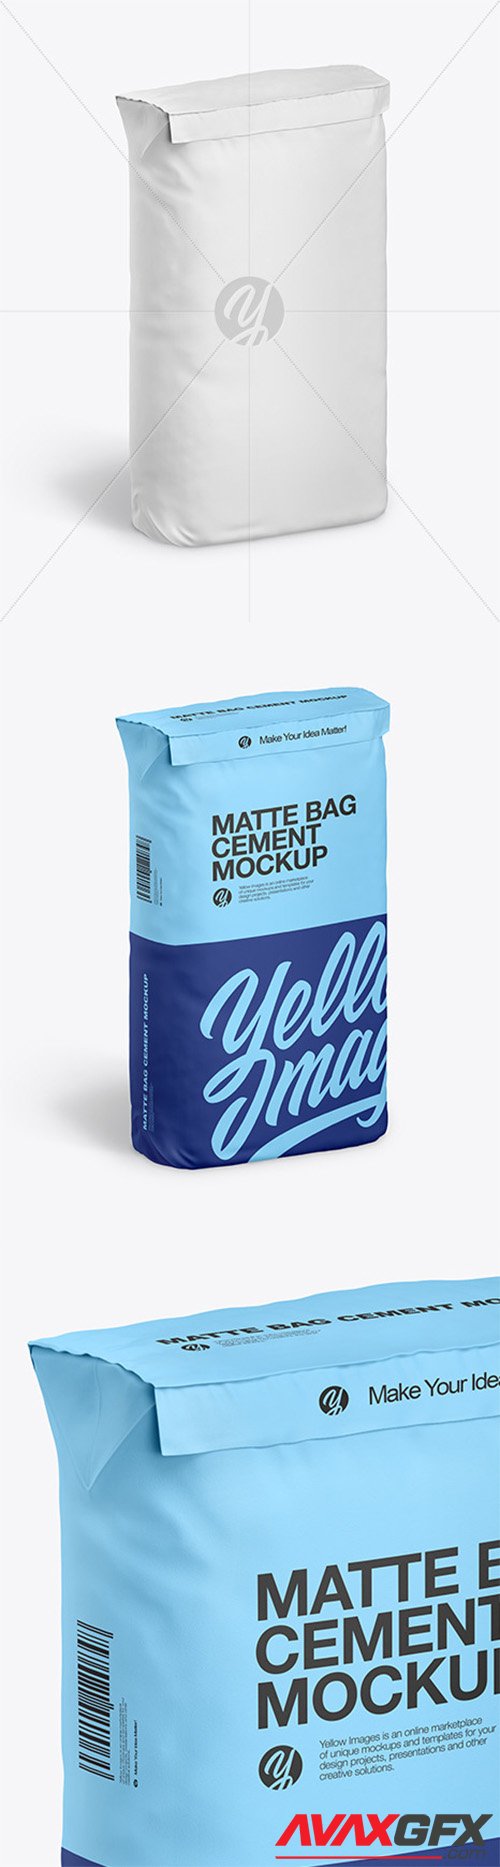 Download Kraft Cement Bag Mockup 51933 Avaxgfx All Downloads That You Need In One Place Graphic From Nitroflare Rapidgator Yellowimages Mockups